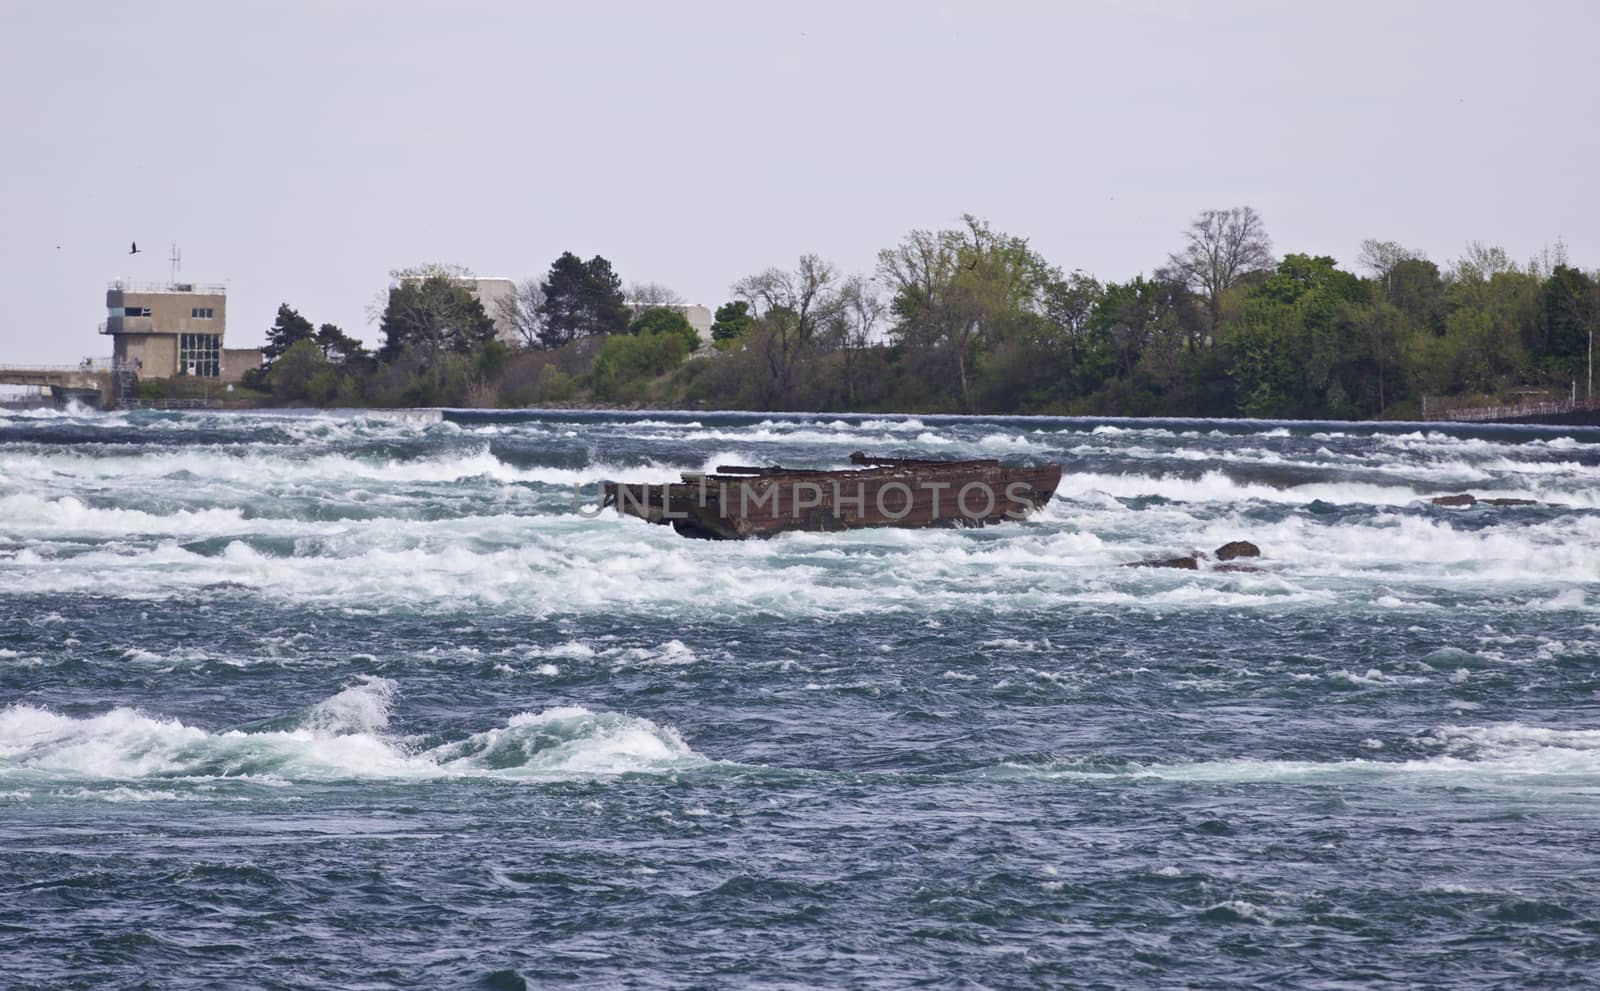 Beautiful image with a broken boat on the river right before the amazing Niagara falls by teo